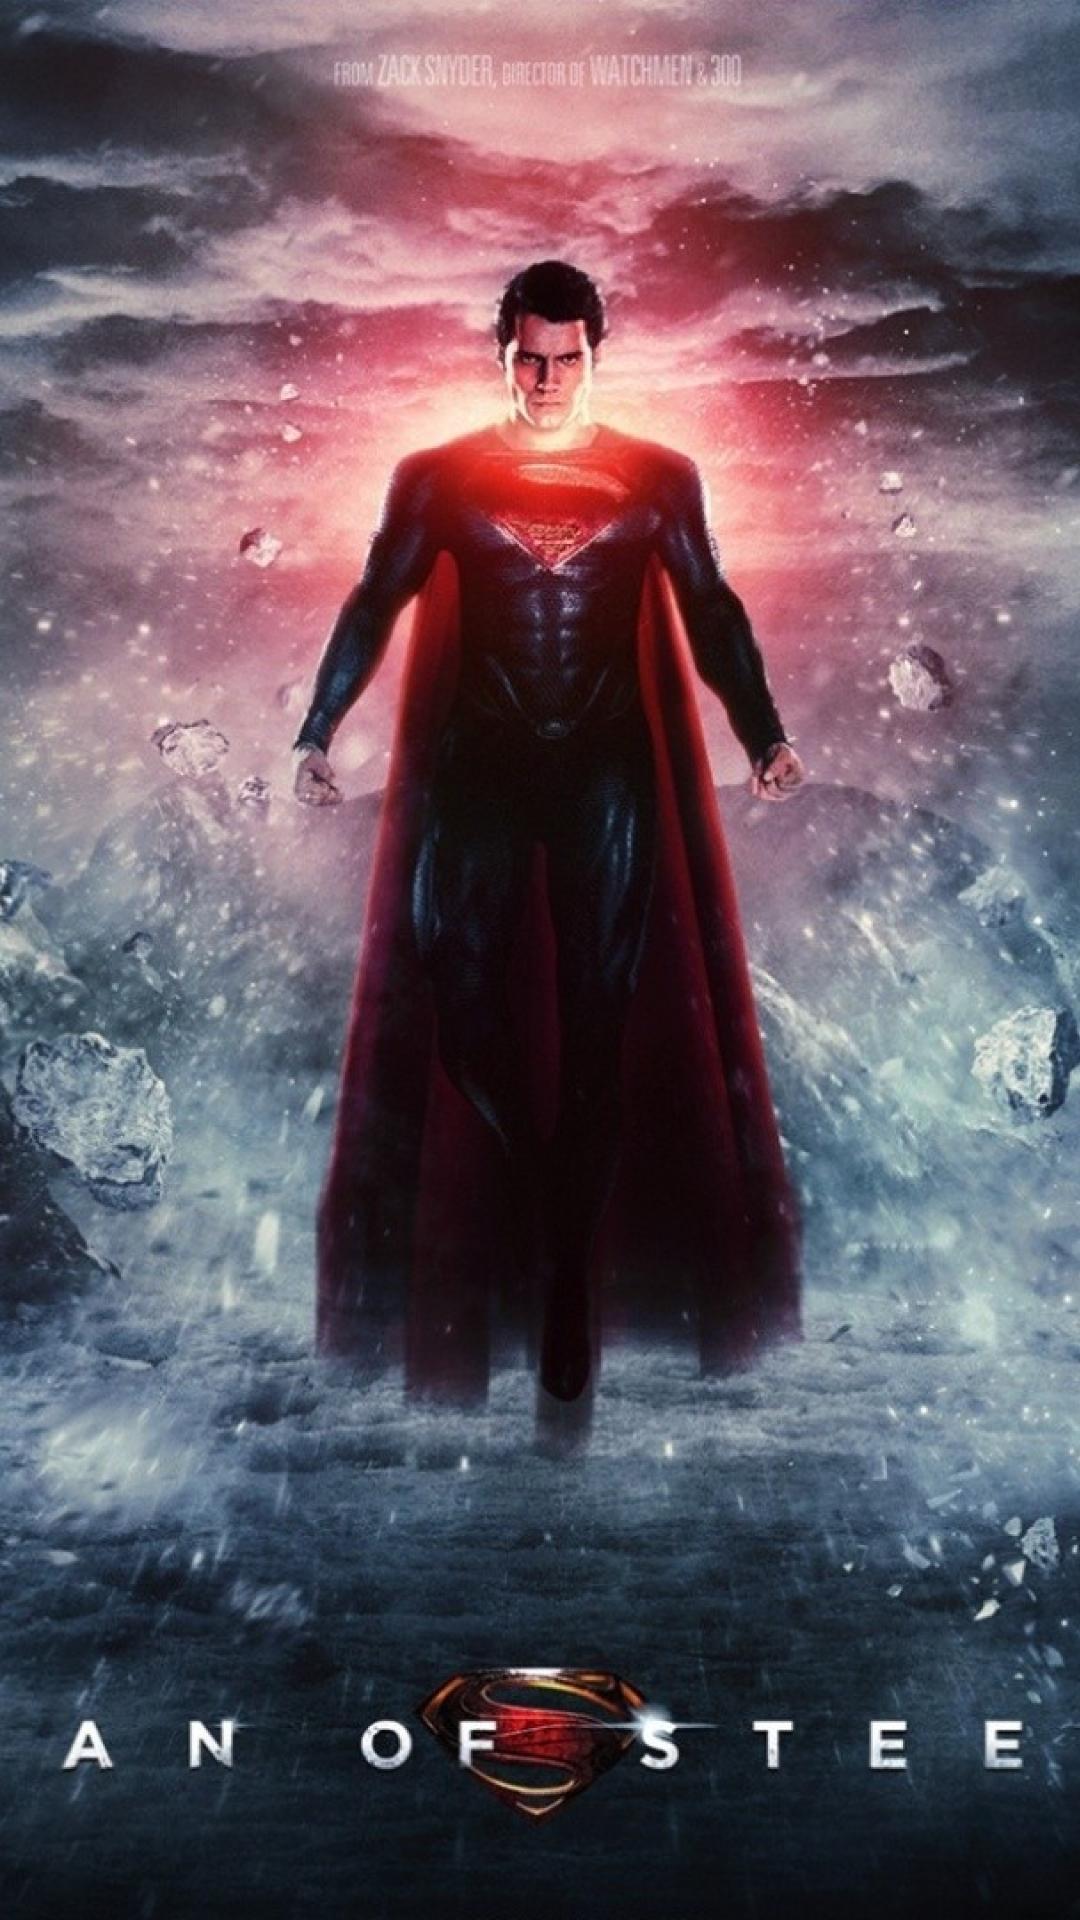 Free download Movies superman henry cavill man of steel movie